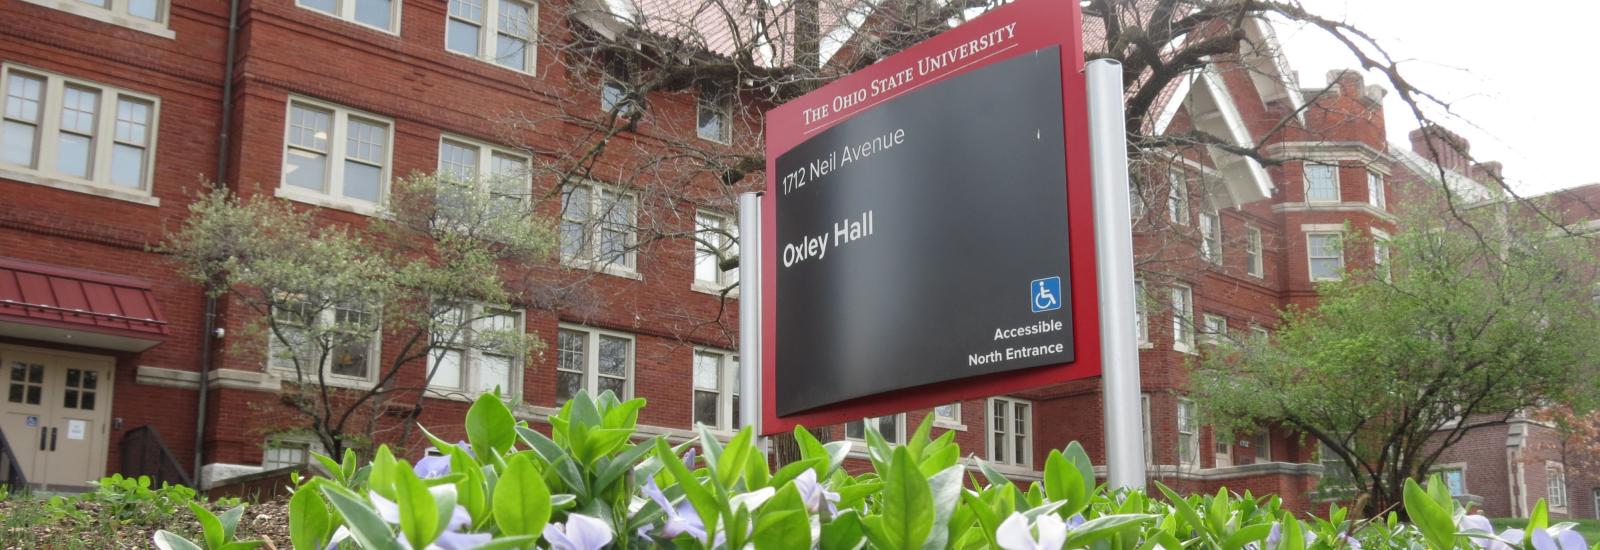 Oxley Hall sign, with building in background and spring flowers in foreground